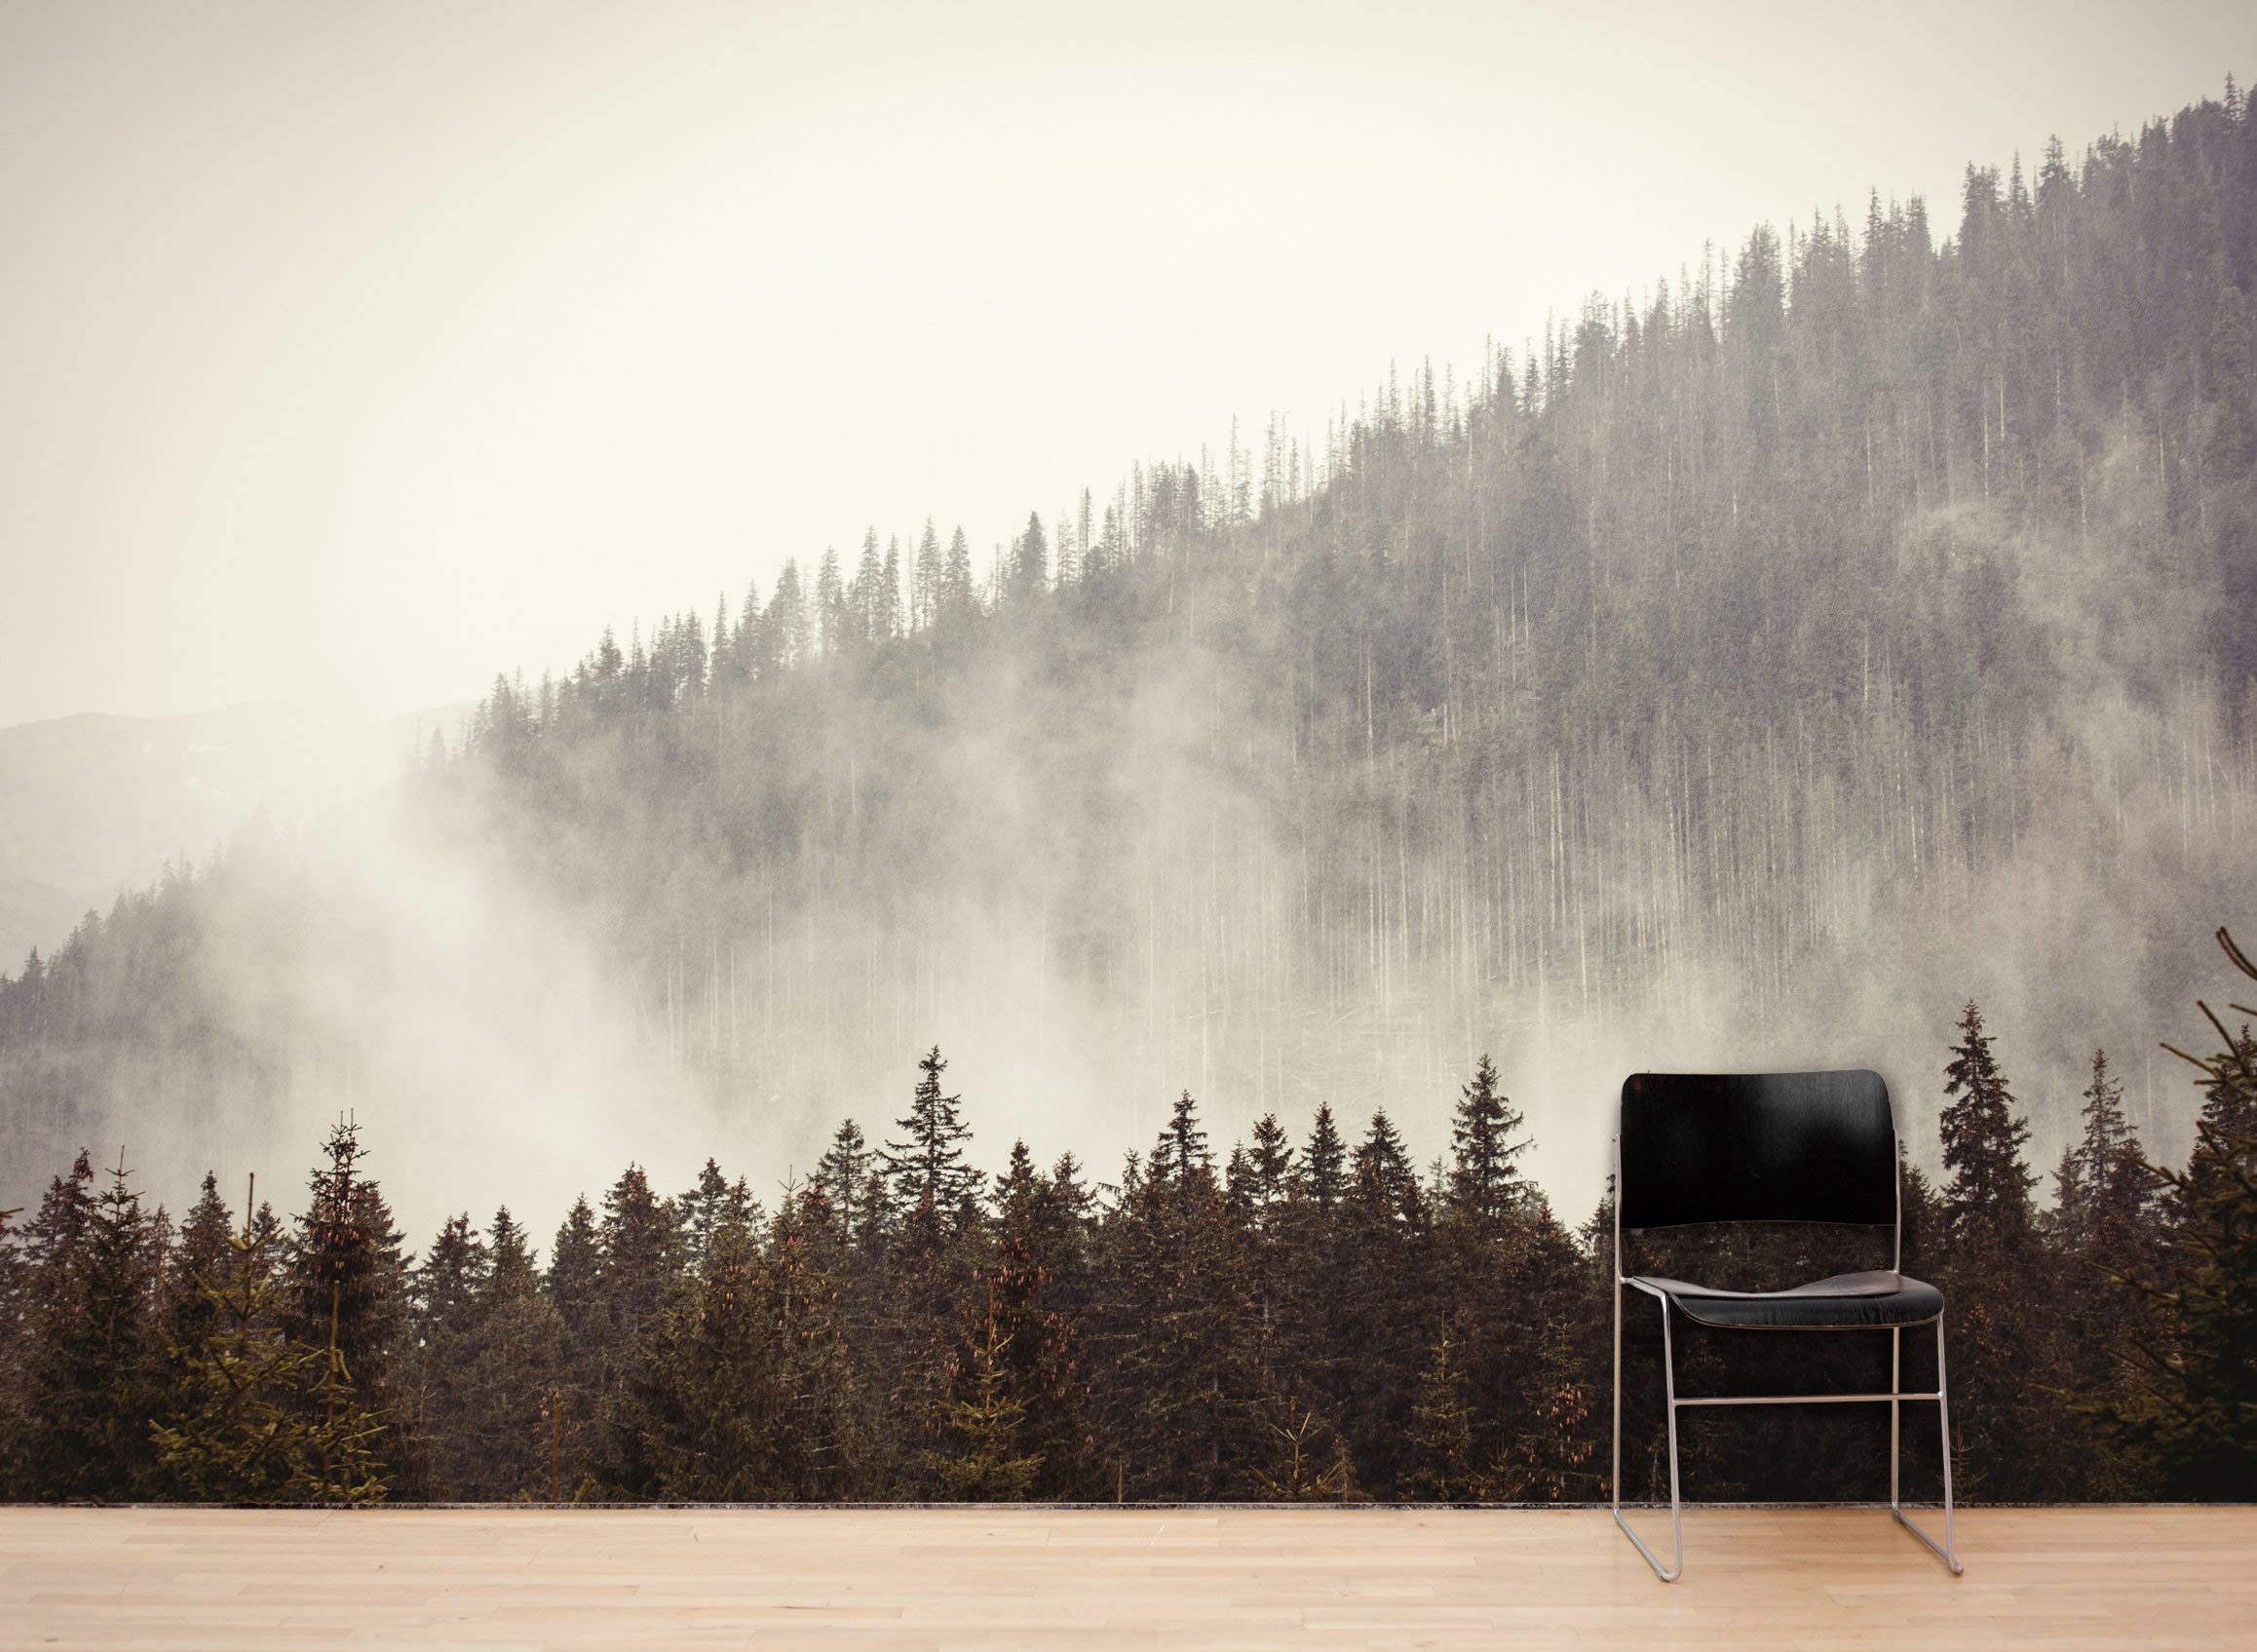 A chair sitting in front of some trees - Fog, foggy forest